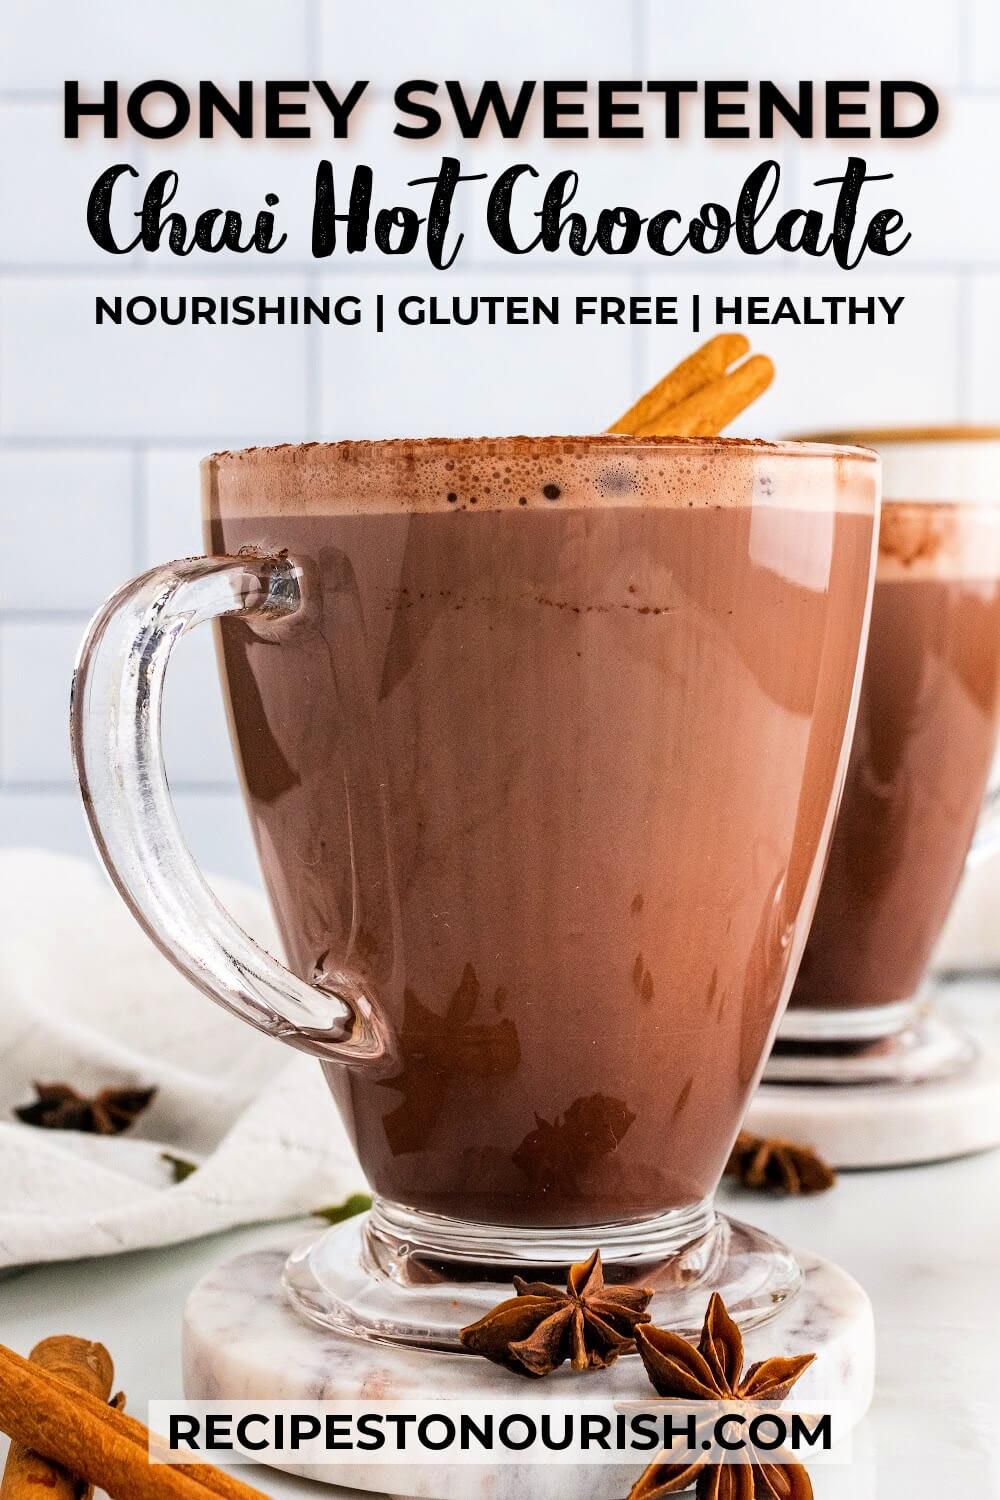 Two glass mugs filled with hot chocolate and garnished with cinnamon sticks, sitting on marble coasters with dried star anise pods sitting around them and text that says Honey Sweetened Chai Hot Chocolate nourishing gluten free healthy.